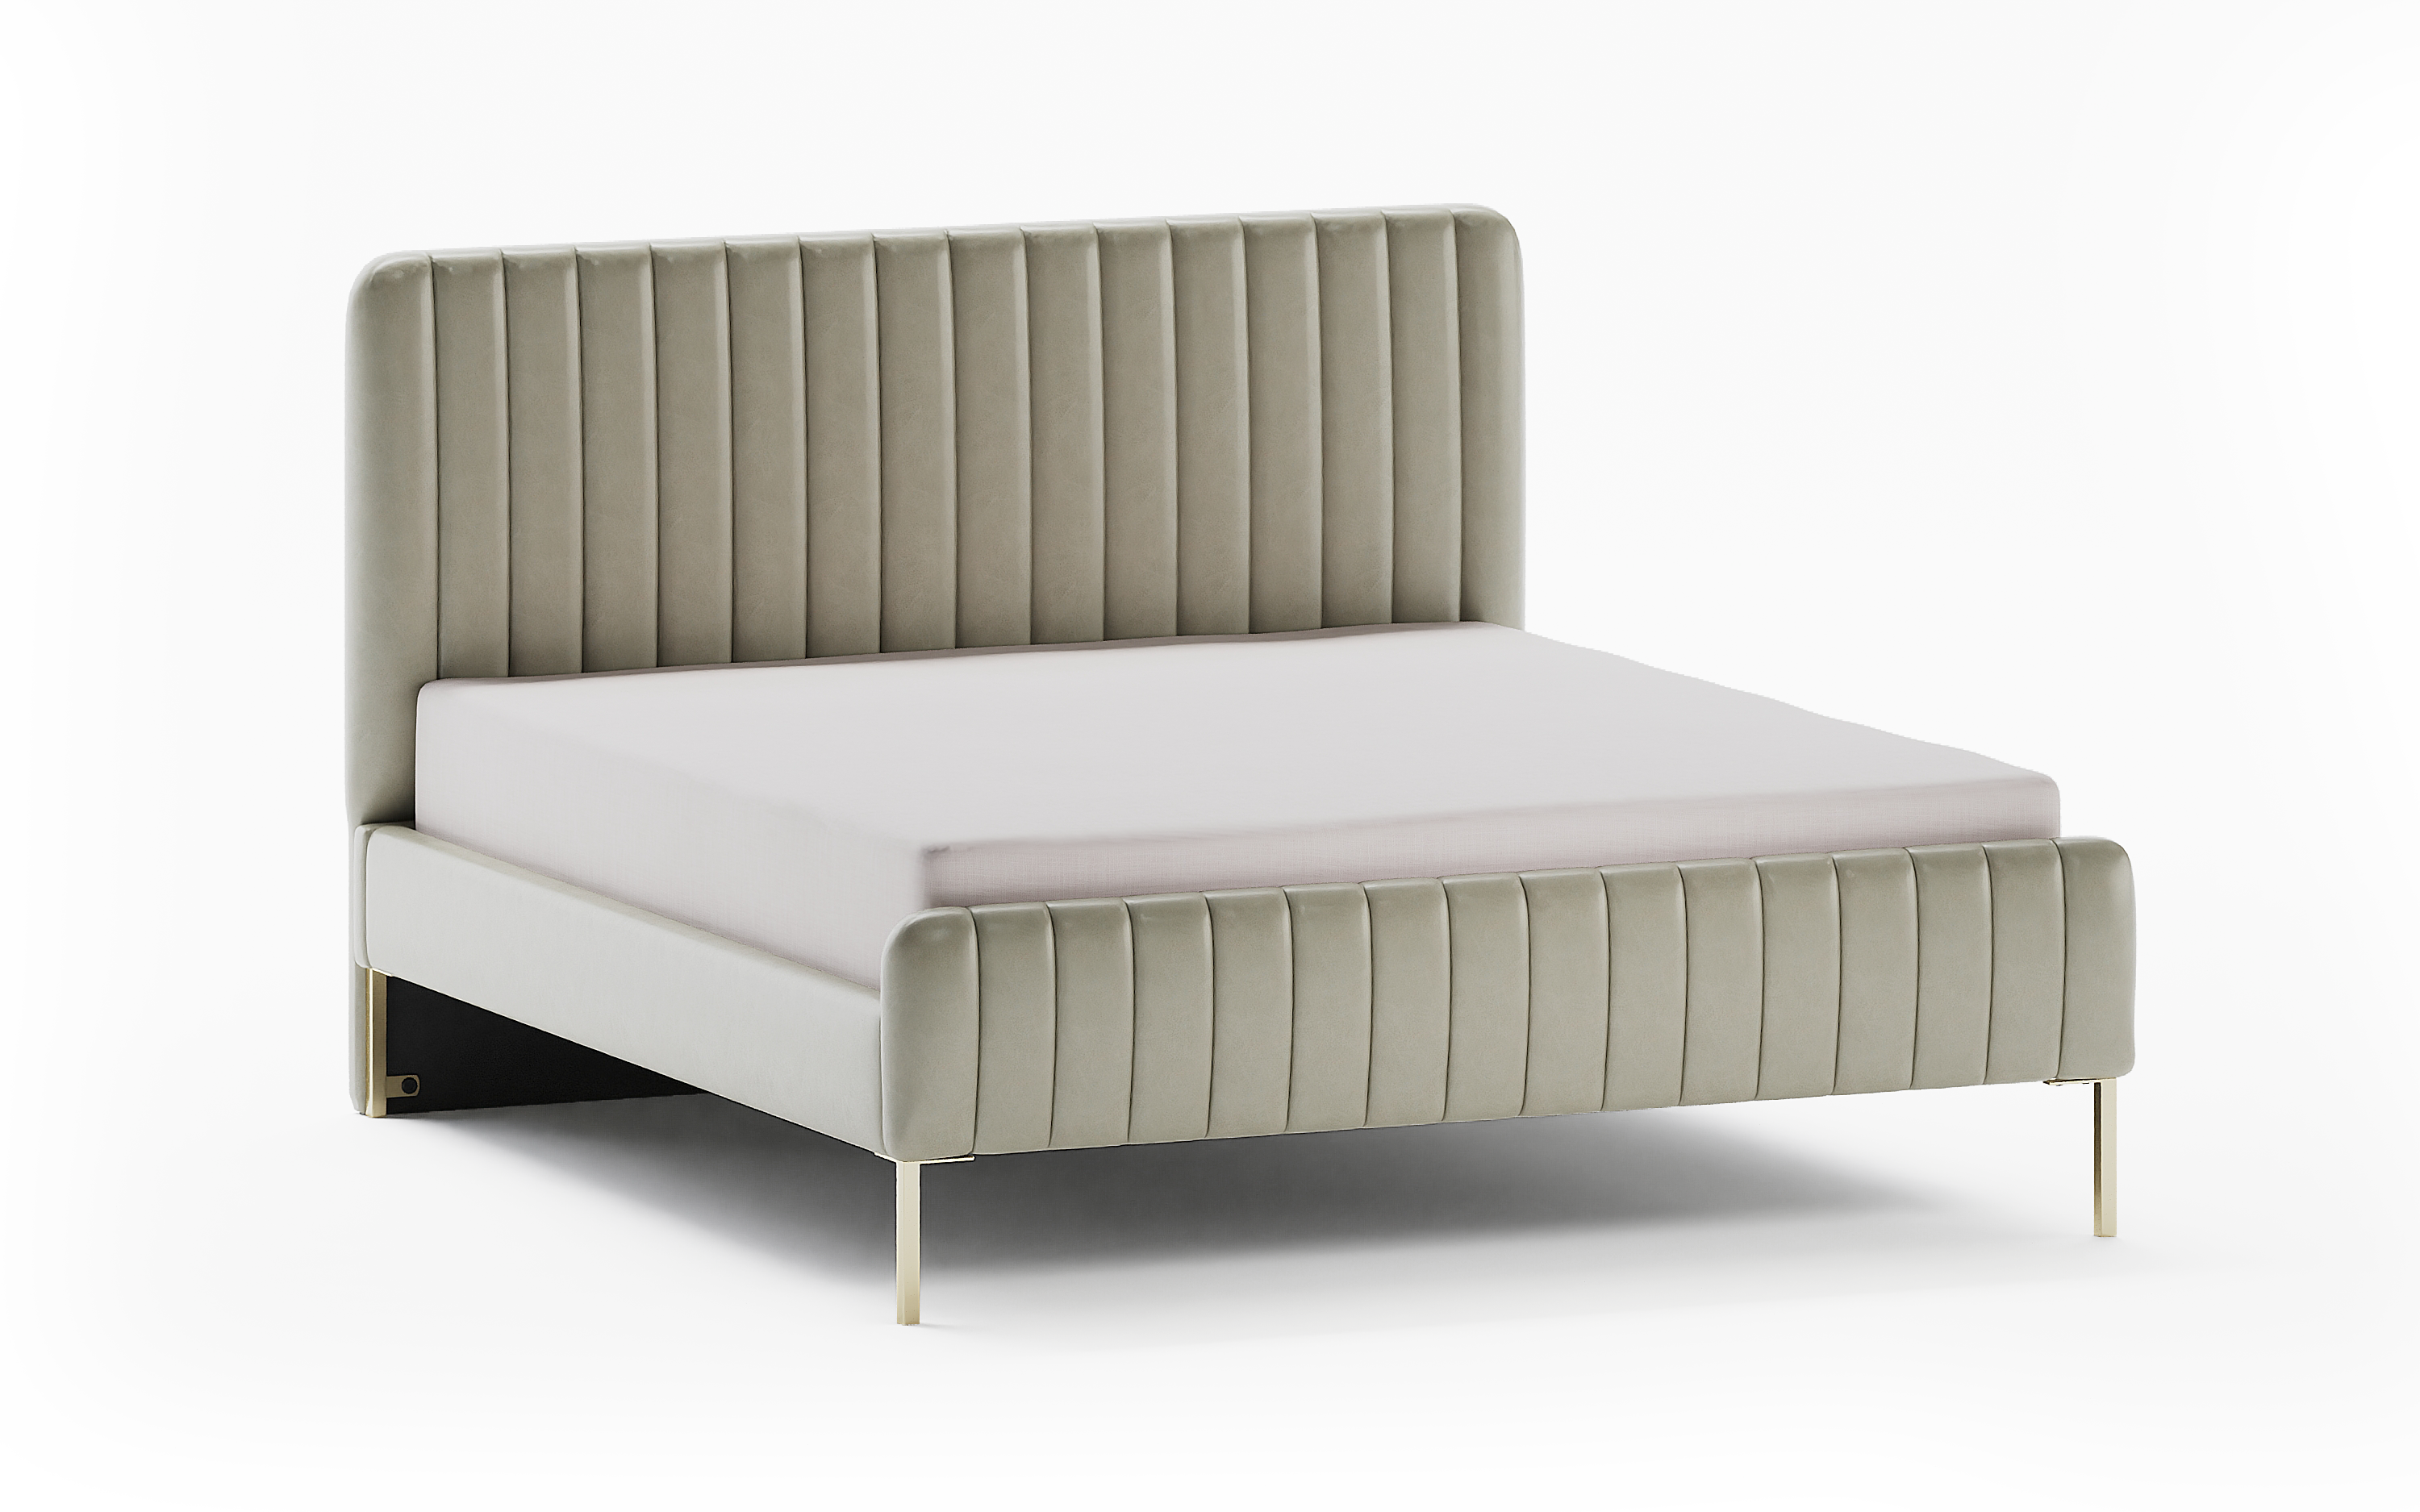 Seana Upholstered King Non Storage Bed